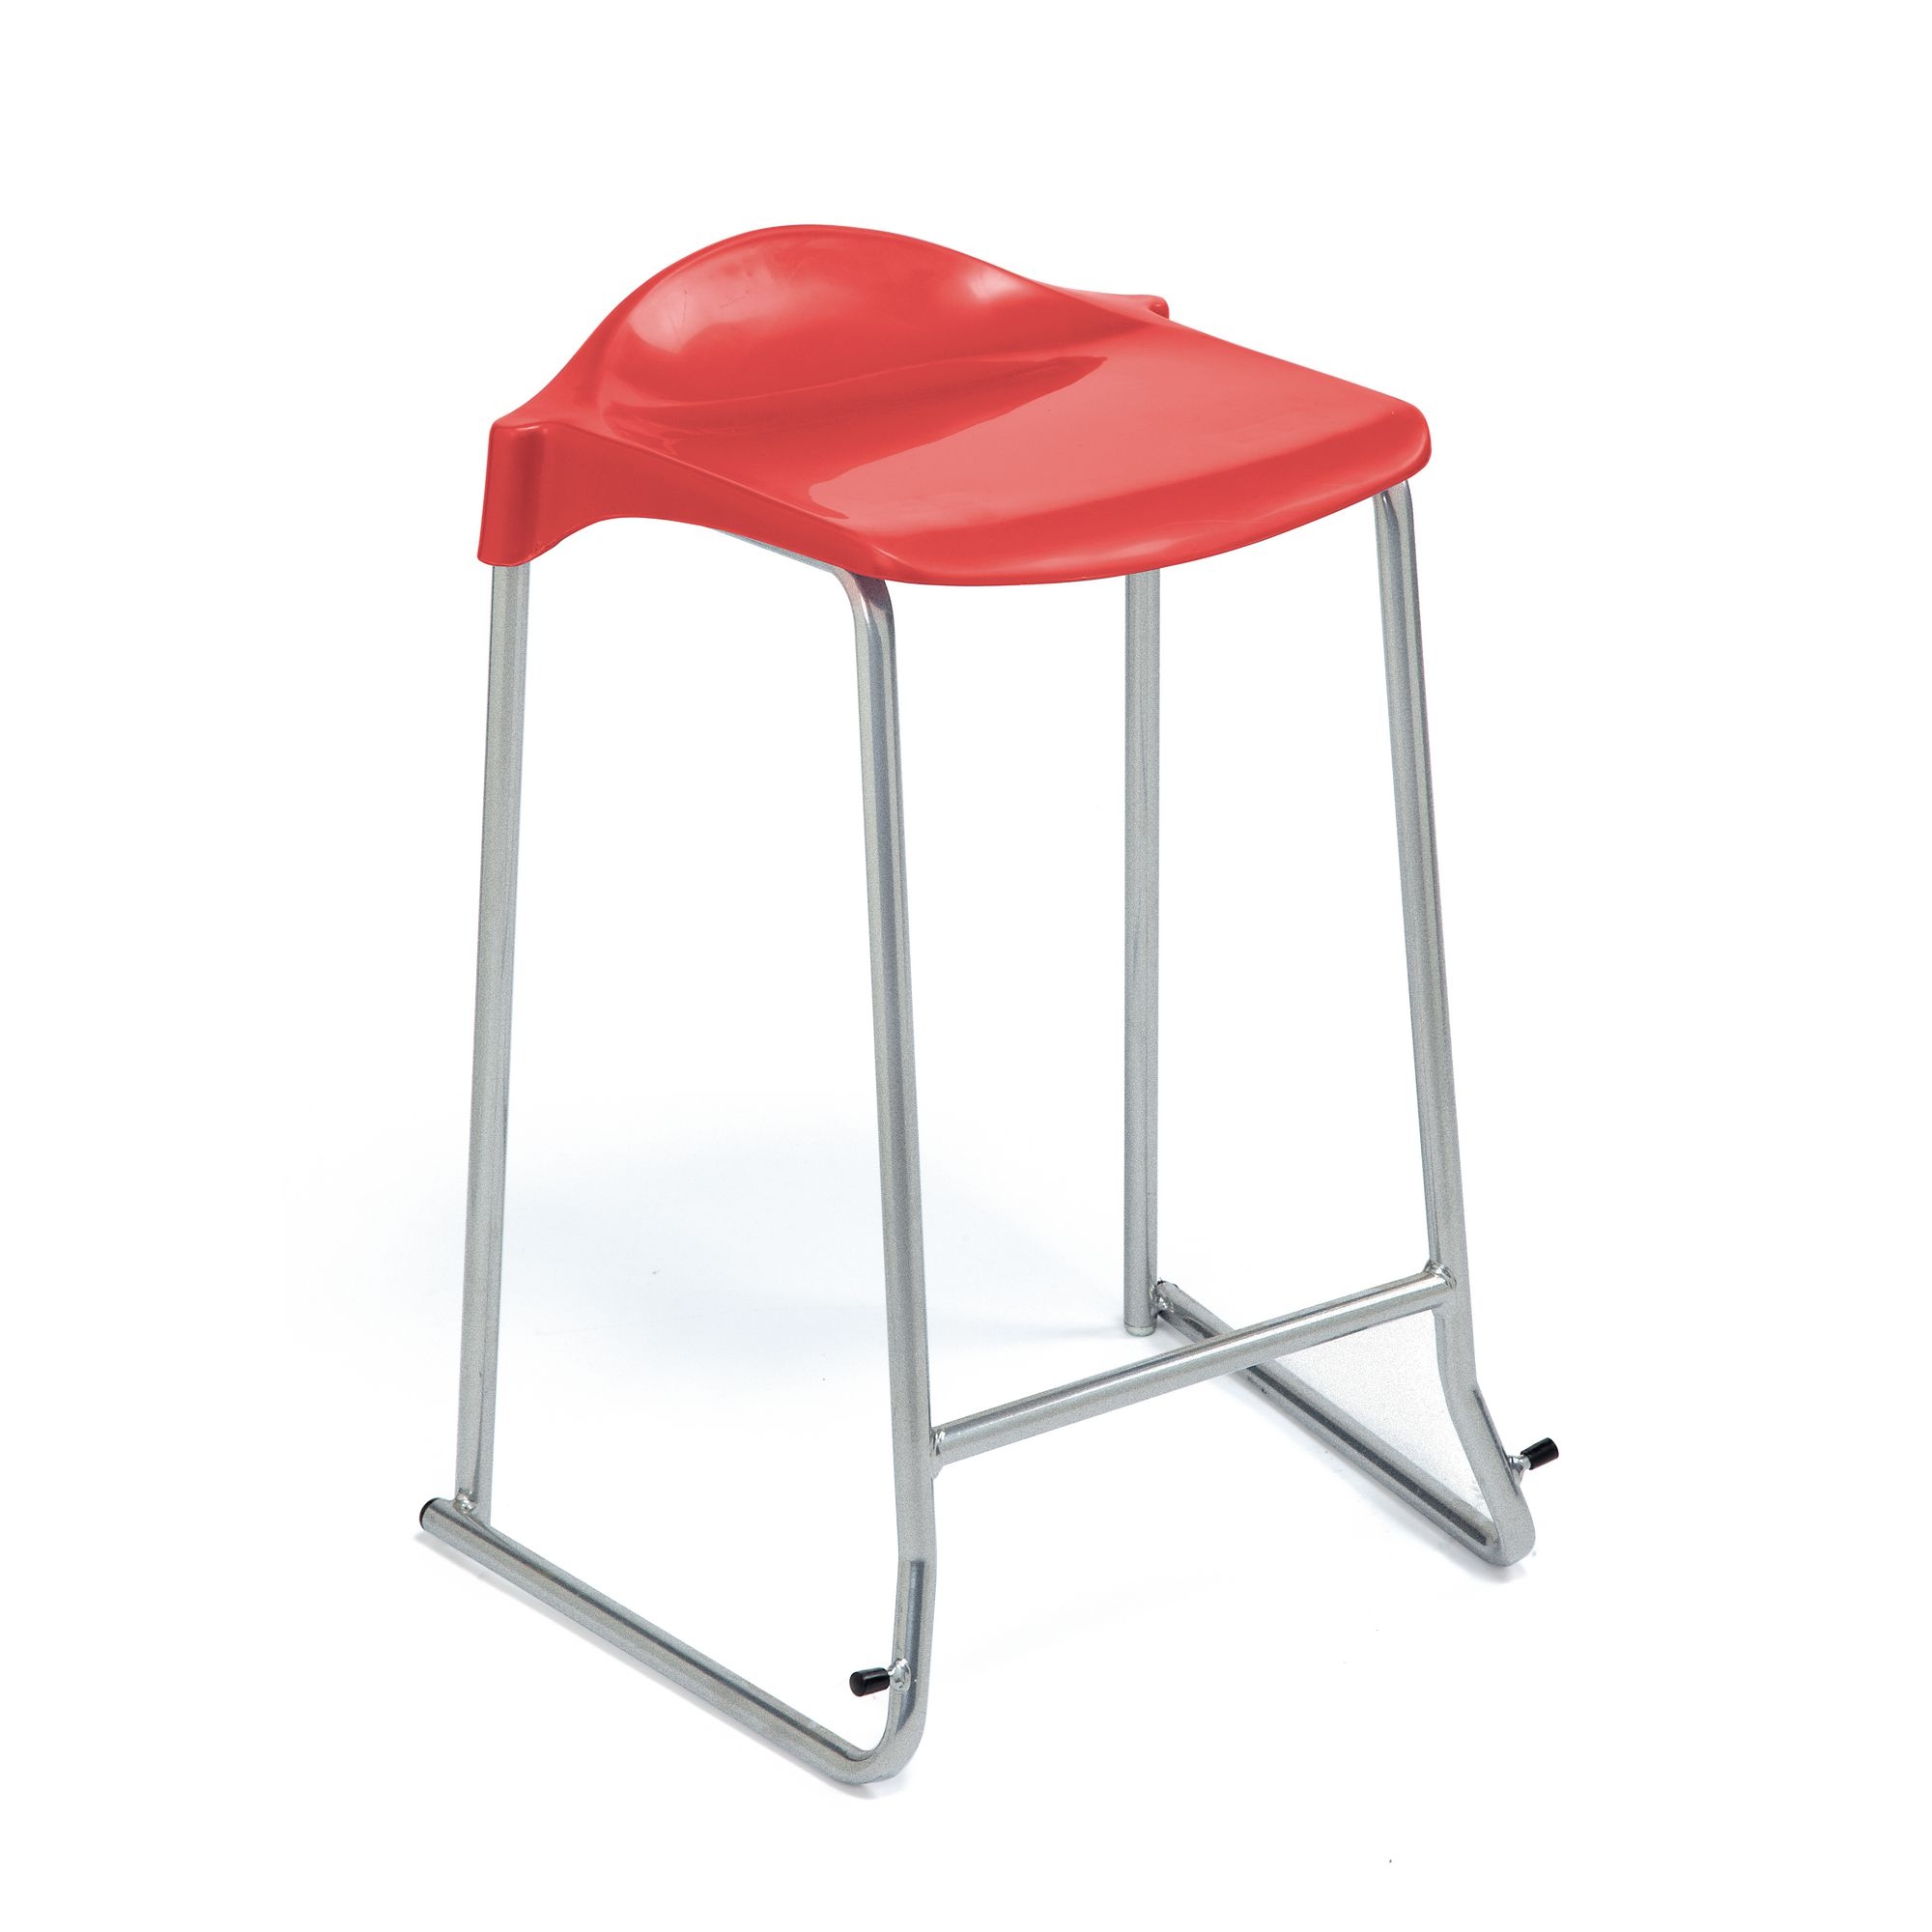 WSM Skid Base Stool - Seat height: 685mm - Lime